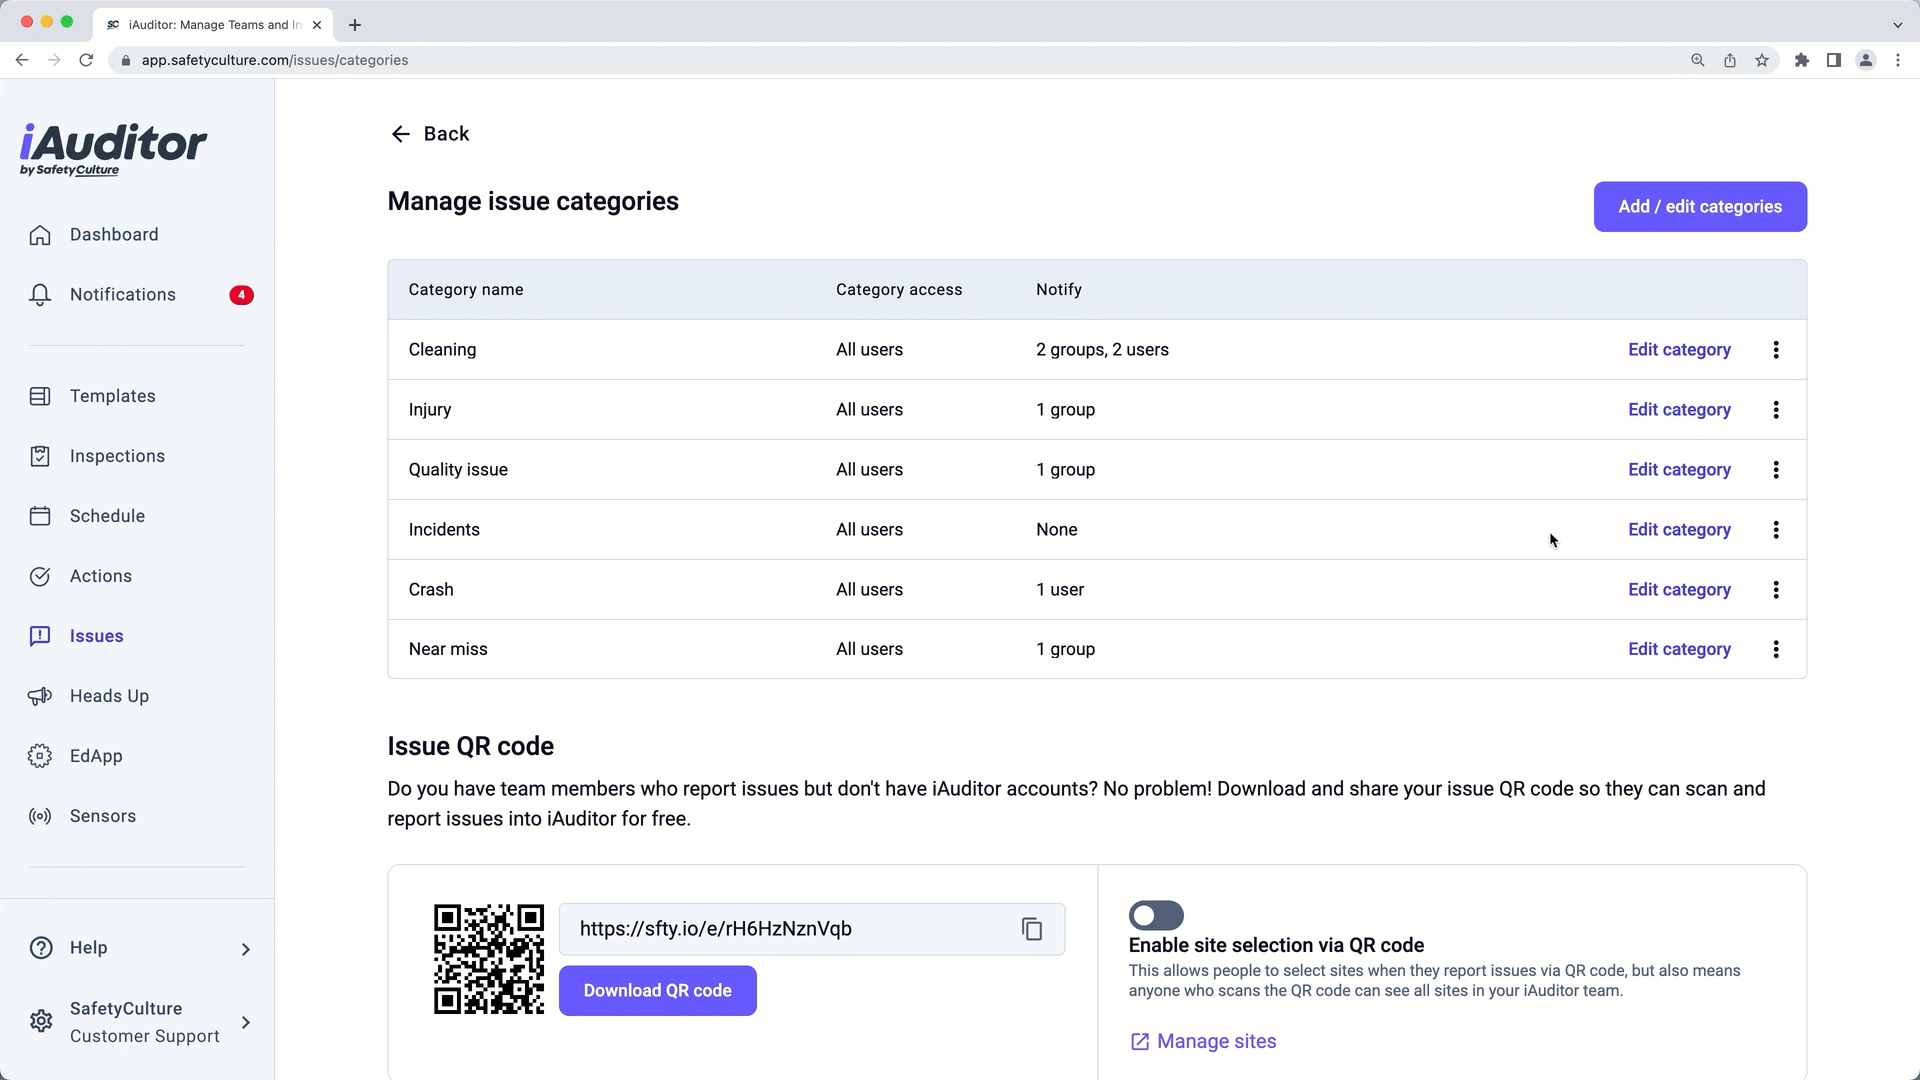 Update an issue category name via the web app.